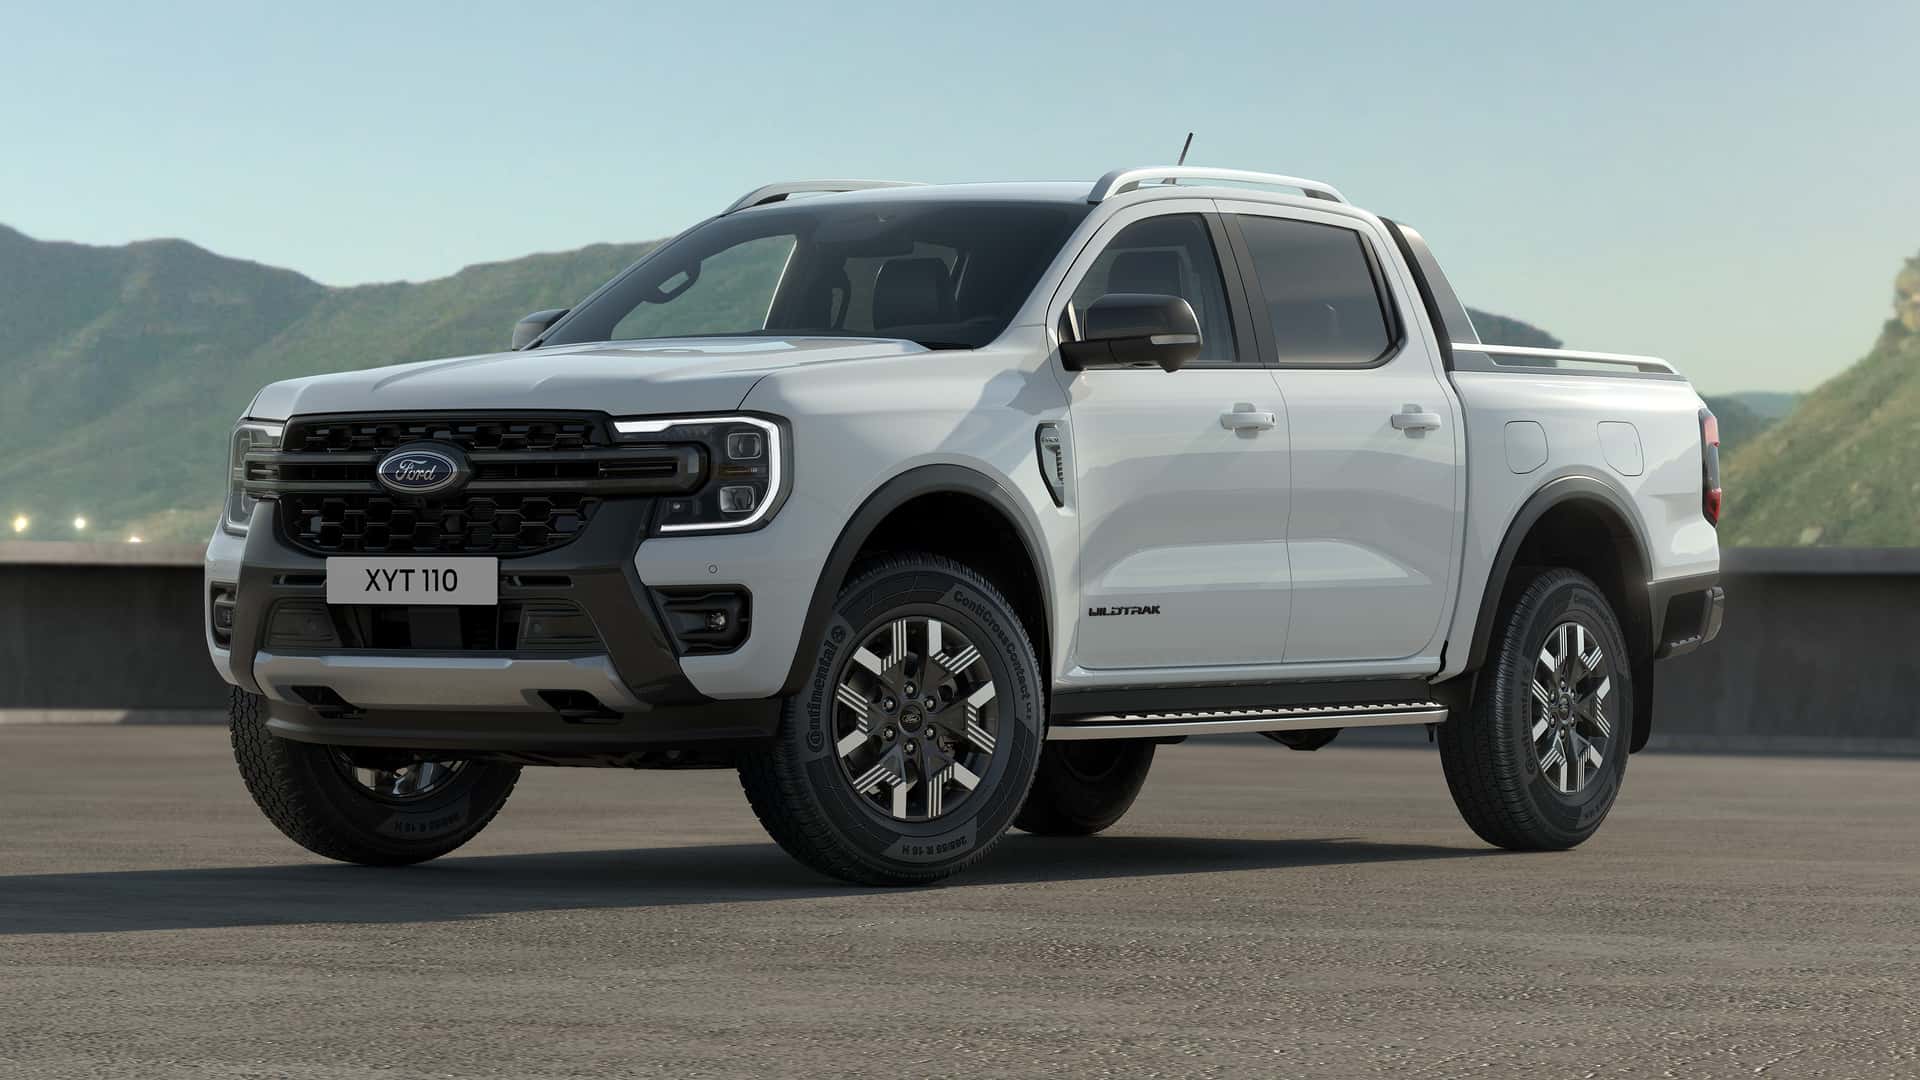 2025 Ford Ranger PHEV Debuts with up to 28 Miles of Electric Range